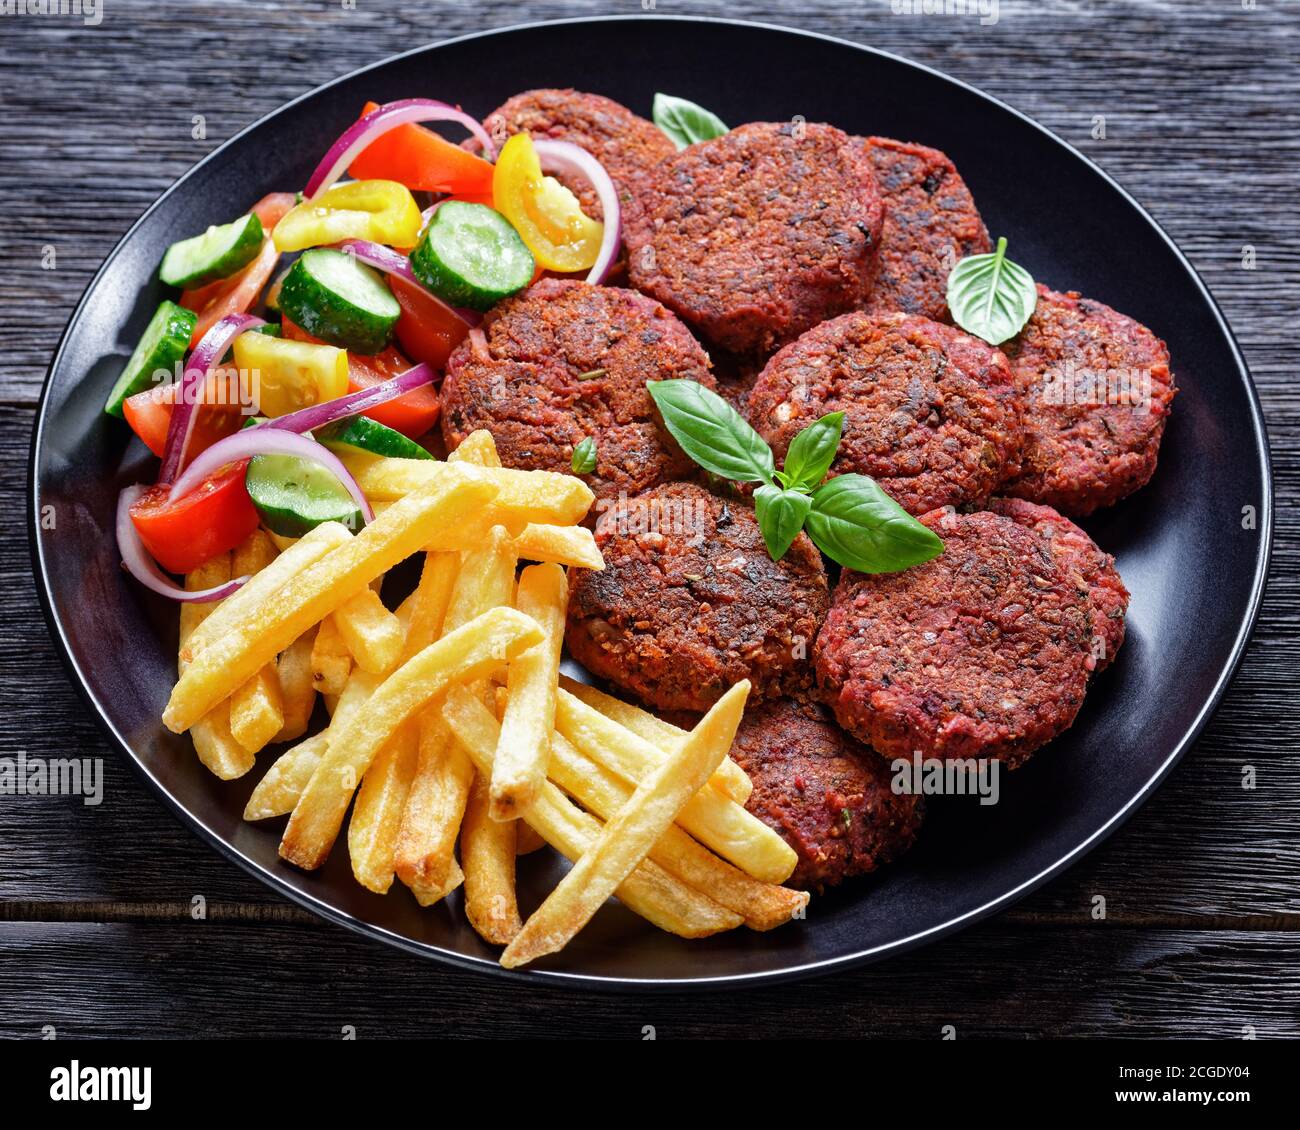 Roasted beet burger patties with french fry, fresh salad of tomato cucumber and red onion with fresh basil served on a black plate on a dark wooden ta Stock Photo